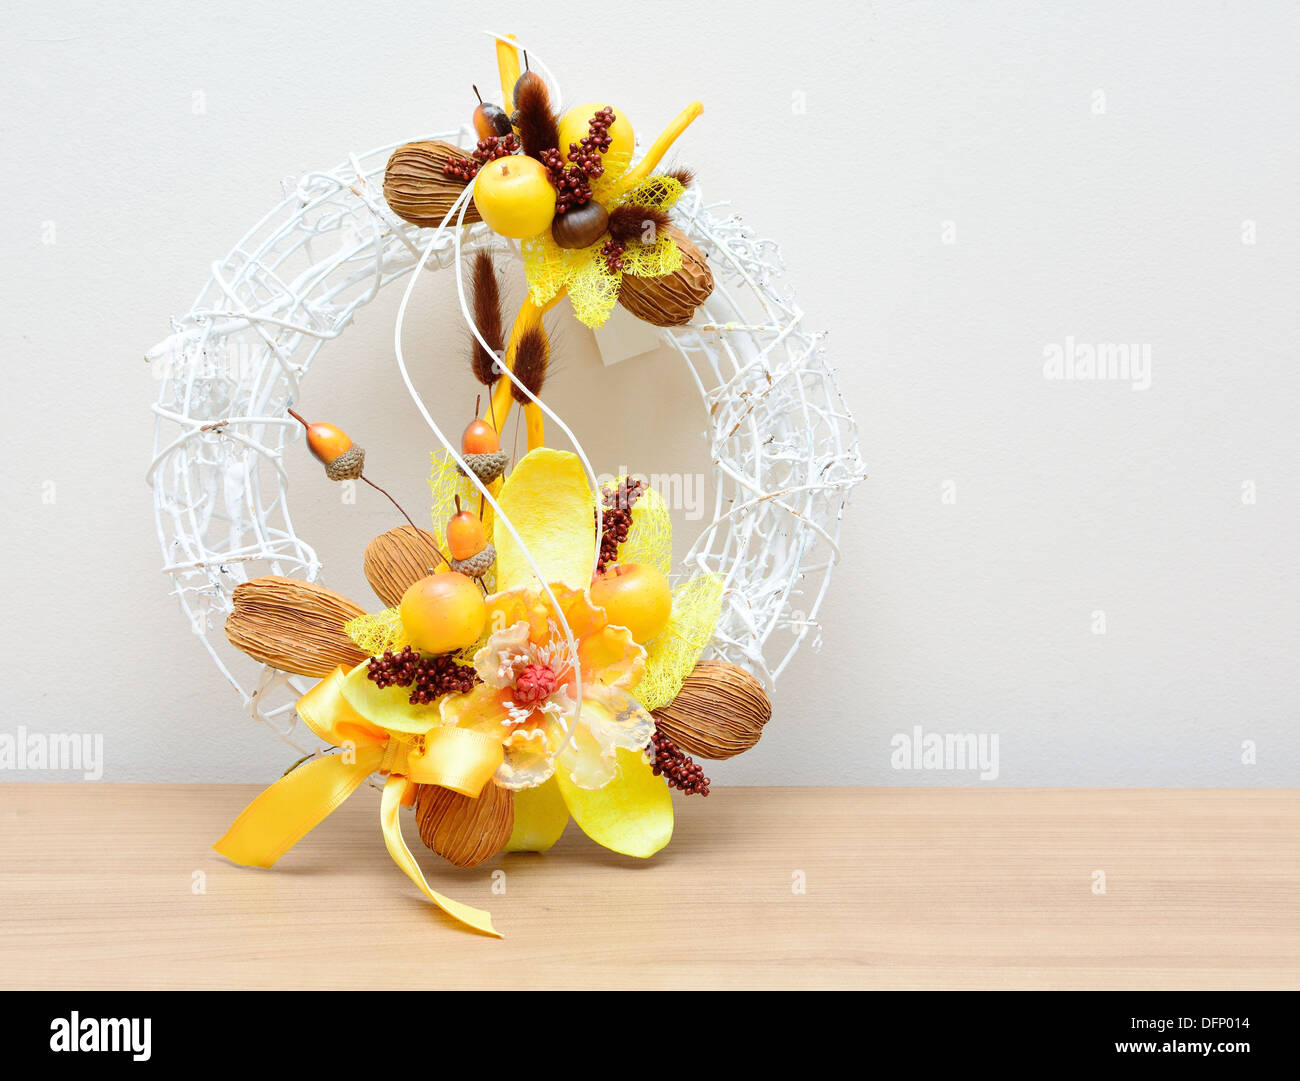 Closeup shot with autumn decoration on the table. Wreath with nuts and acorns. Stock Photo